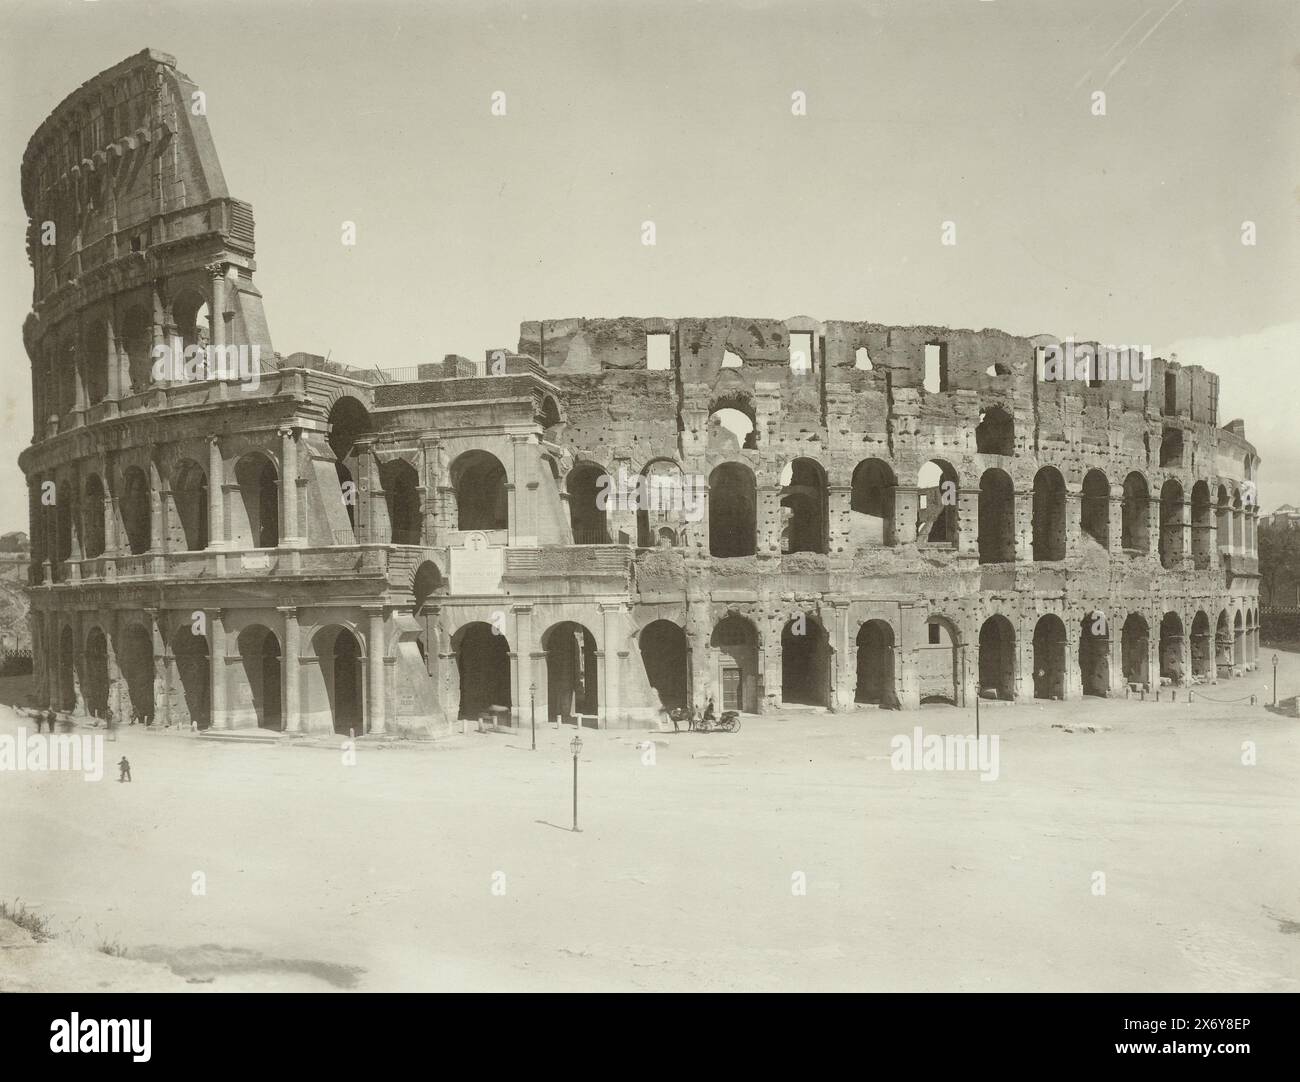 Colosseum in Rome (title on object), P.I.N. 5818 Roma Amfiteatro flavio o colosseo (A.D. dell 72 all' 80). (title on object), photograph, Fratelli Alinari, (mentioned on object), Rome, Netherlands, c. 1893 - c. 1903, photographic support, albumen print, height, 197 mm × width, 248 mm, height, 309 mm × width, 507 mm Stock Photo